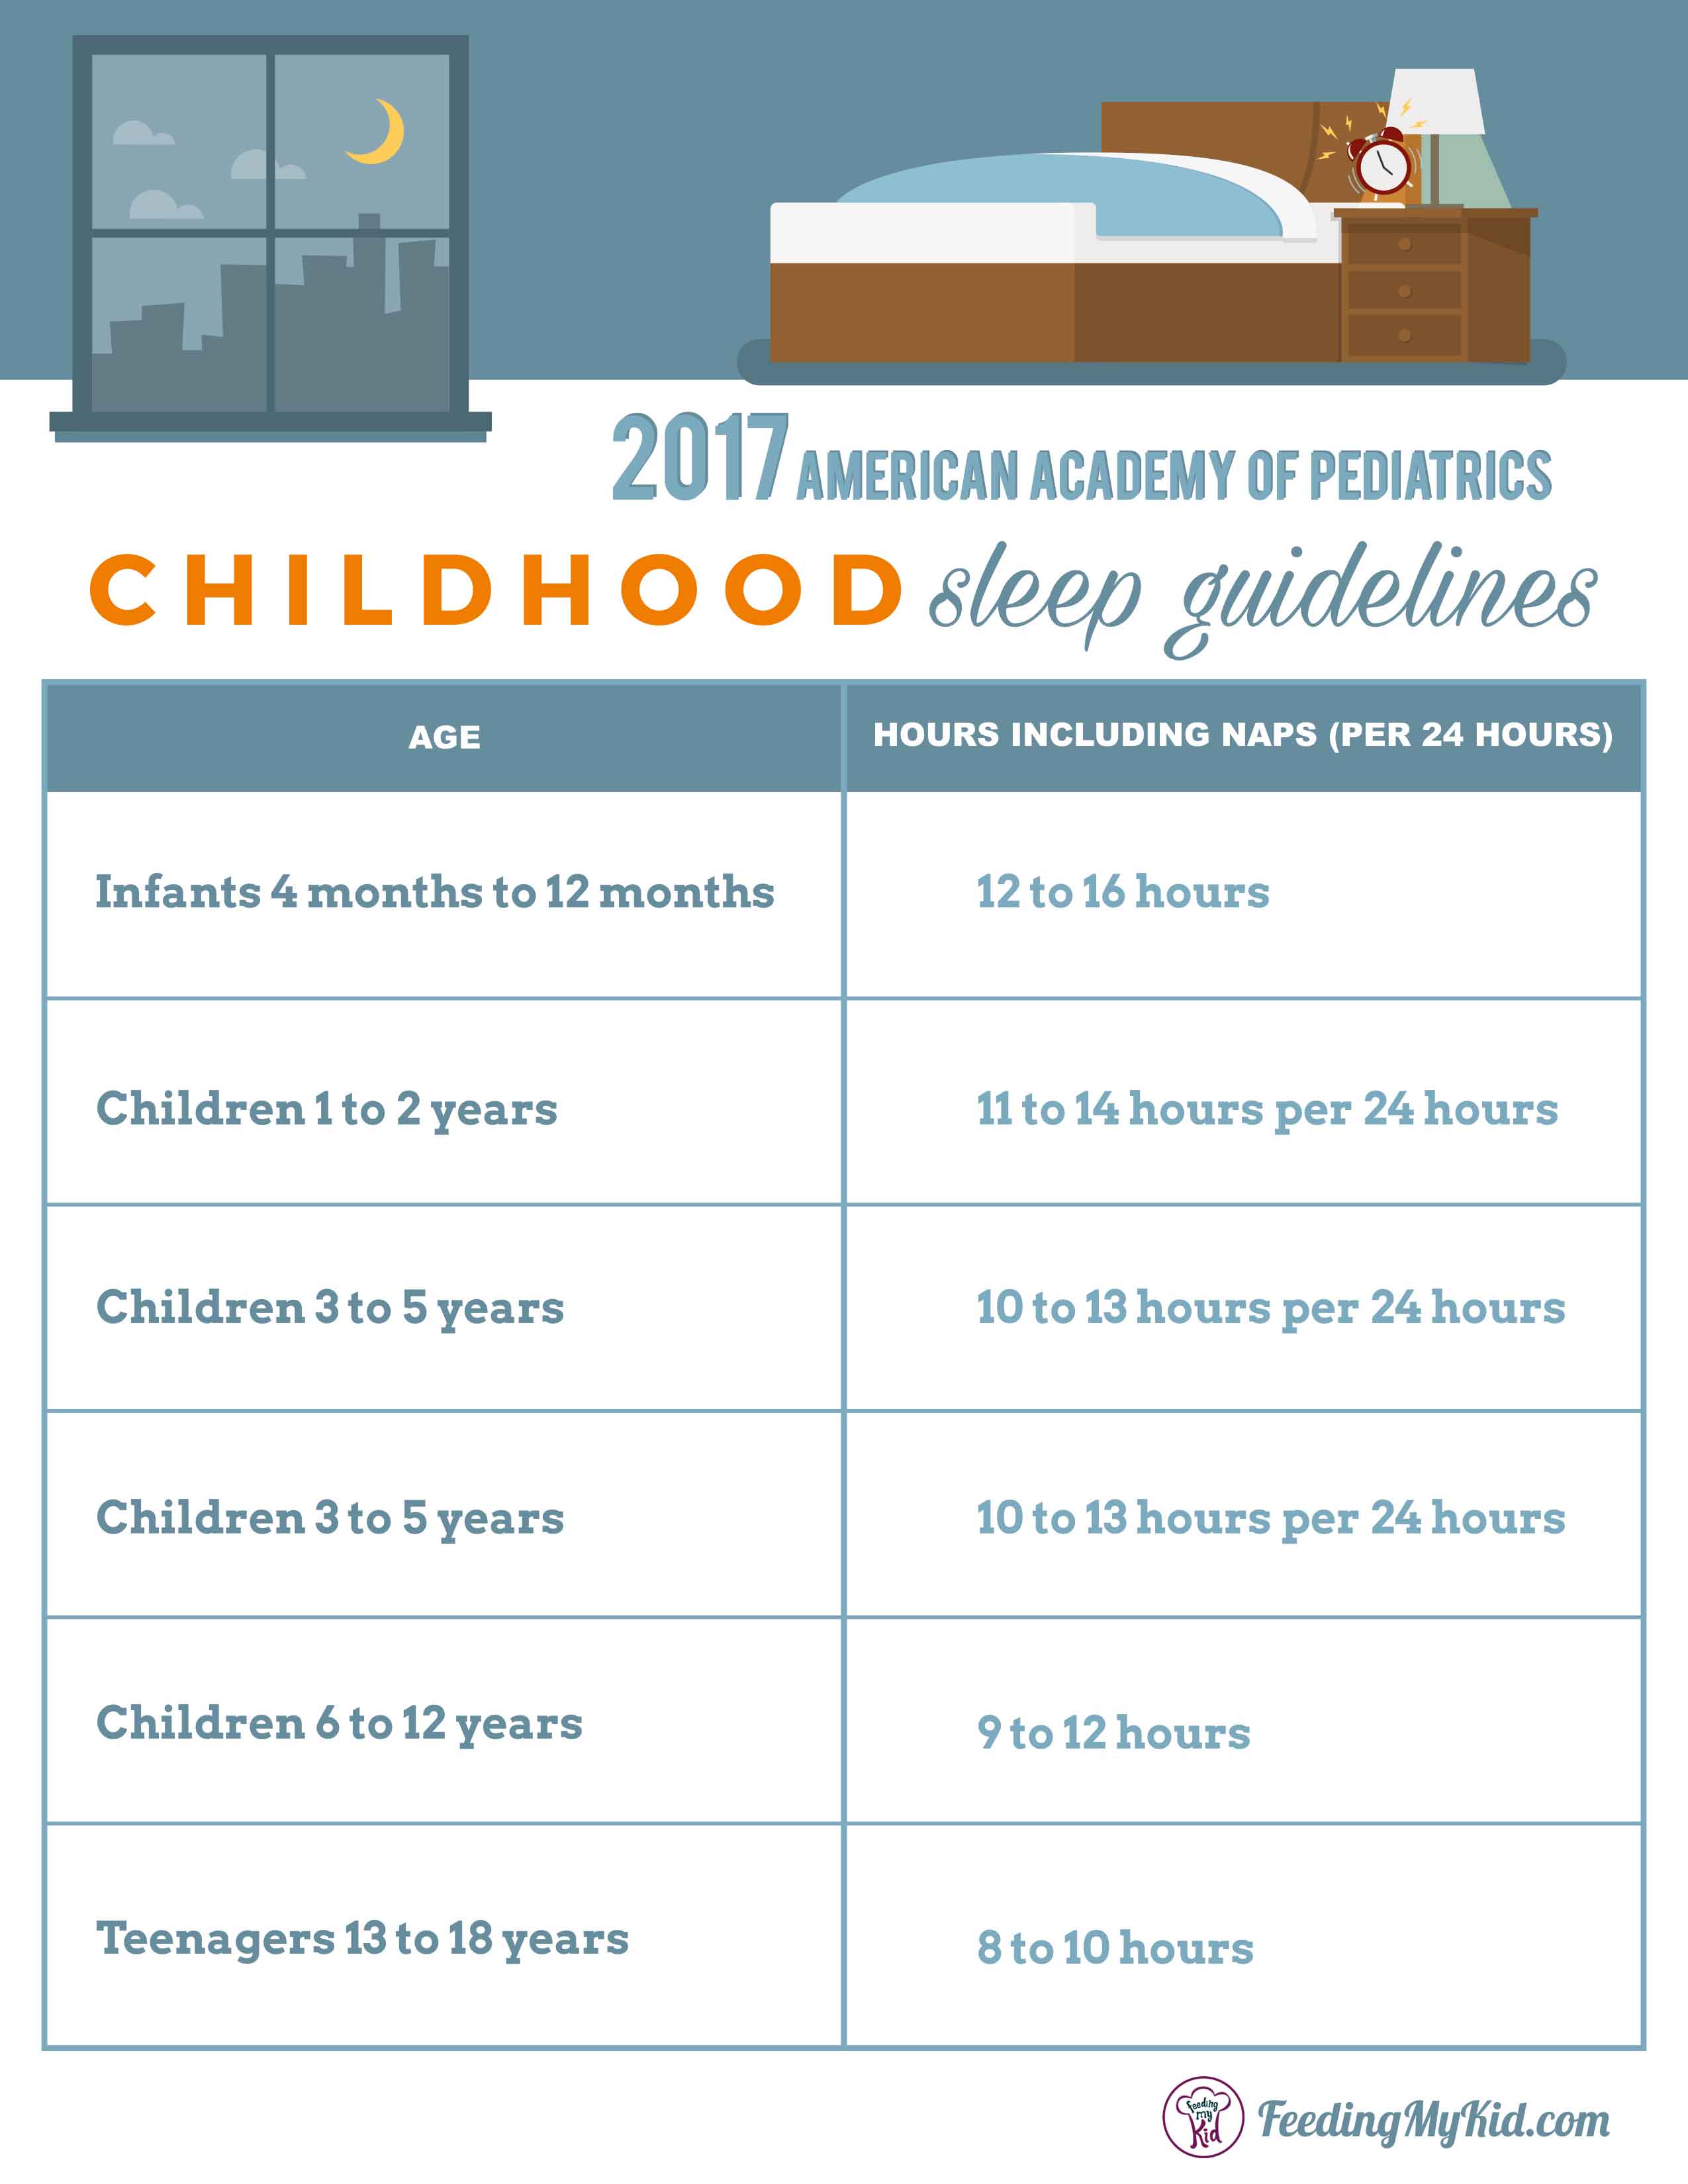 When do babies sleep through the night? Learn everything you need to know about the 2017 American Academy of Pediatrics’ childhood sleep guidelines.